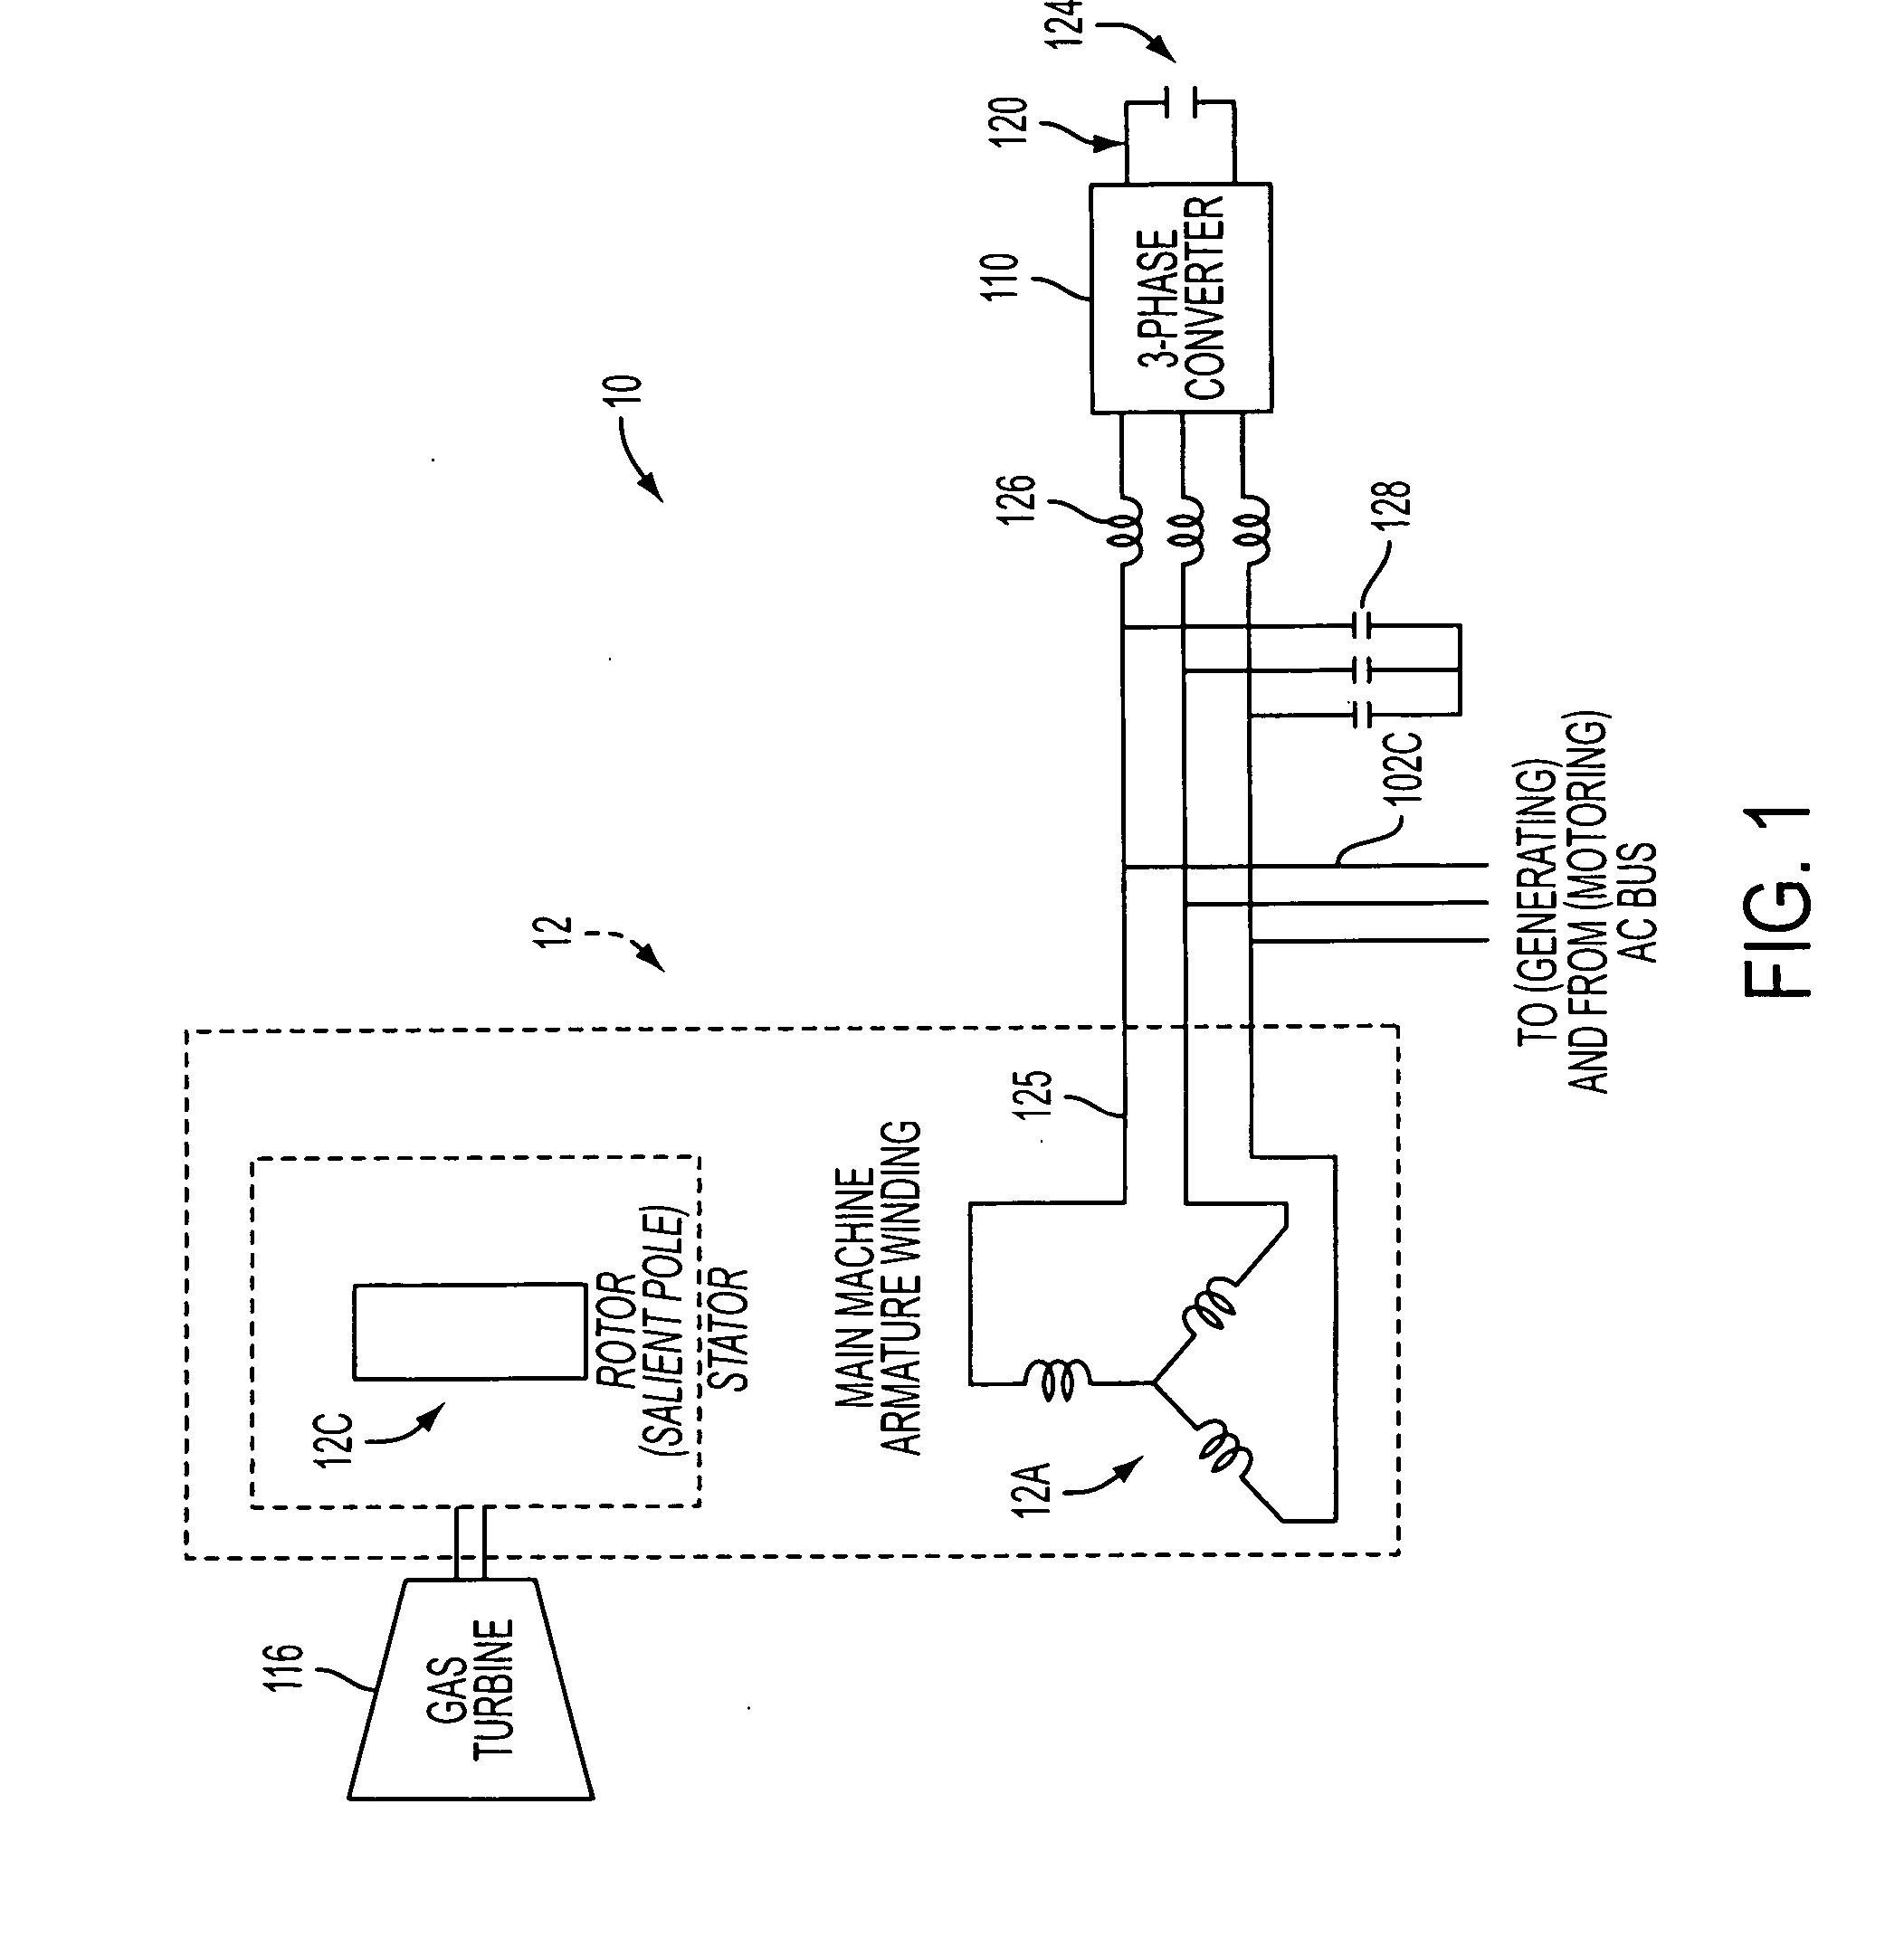 System and method for AC power generation from a reluctance machine